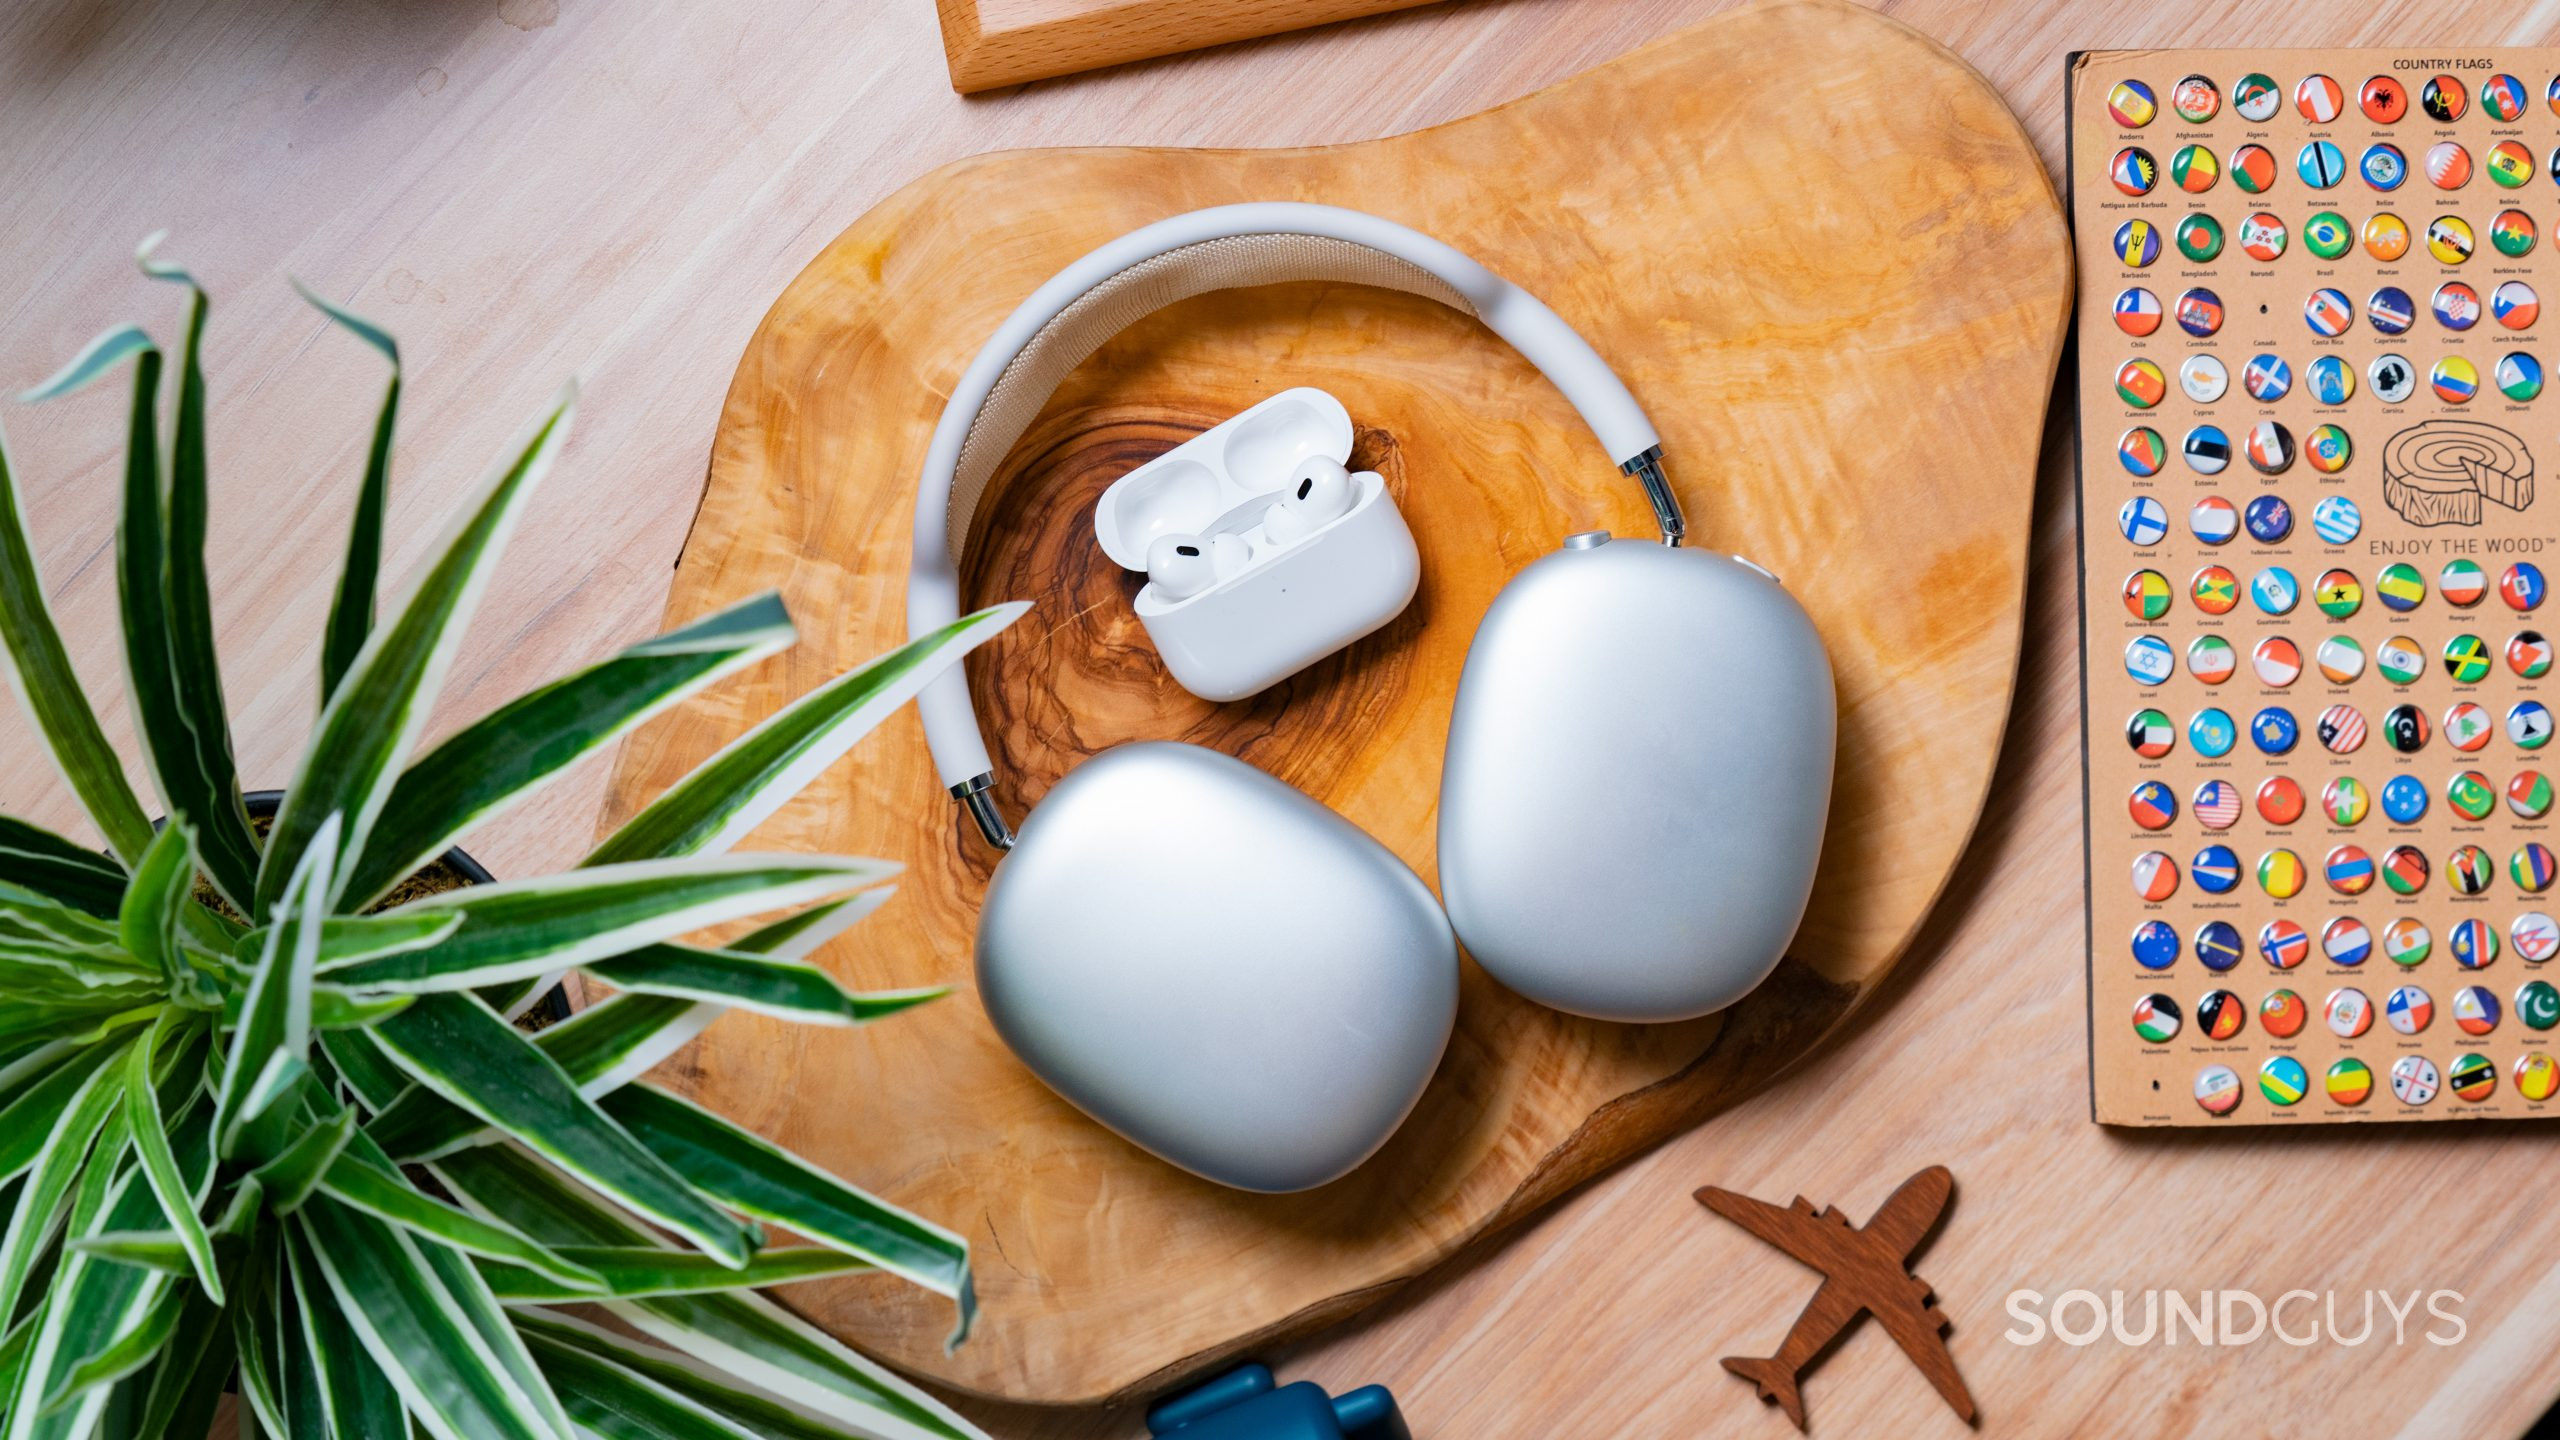 Apple AirPods (2nd generation) review: Still not for everyone - SoundGuys